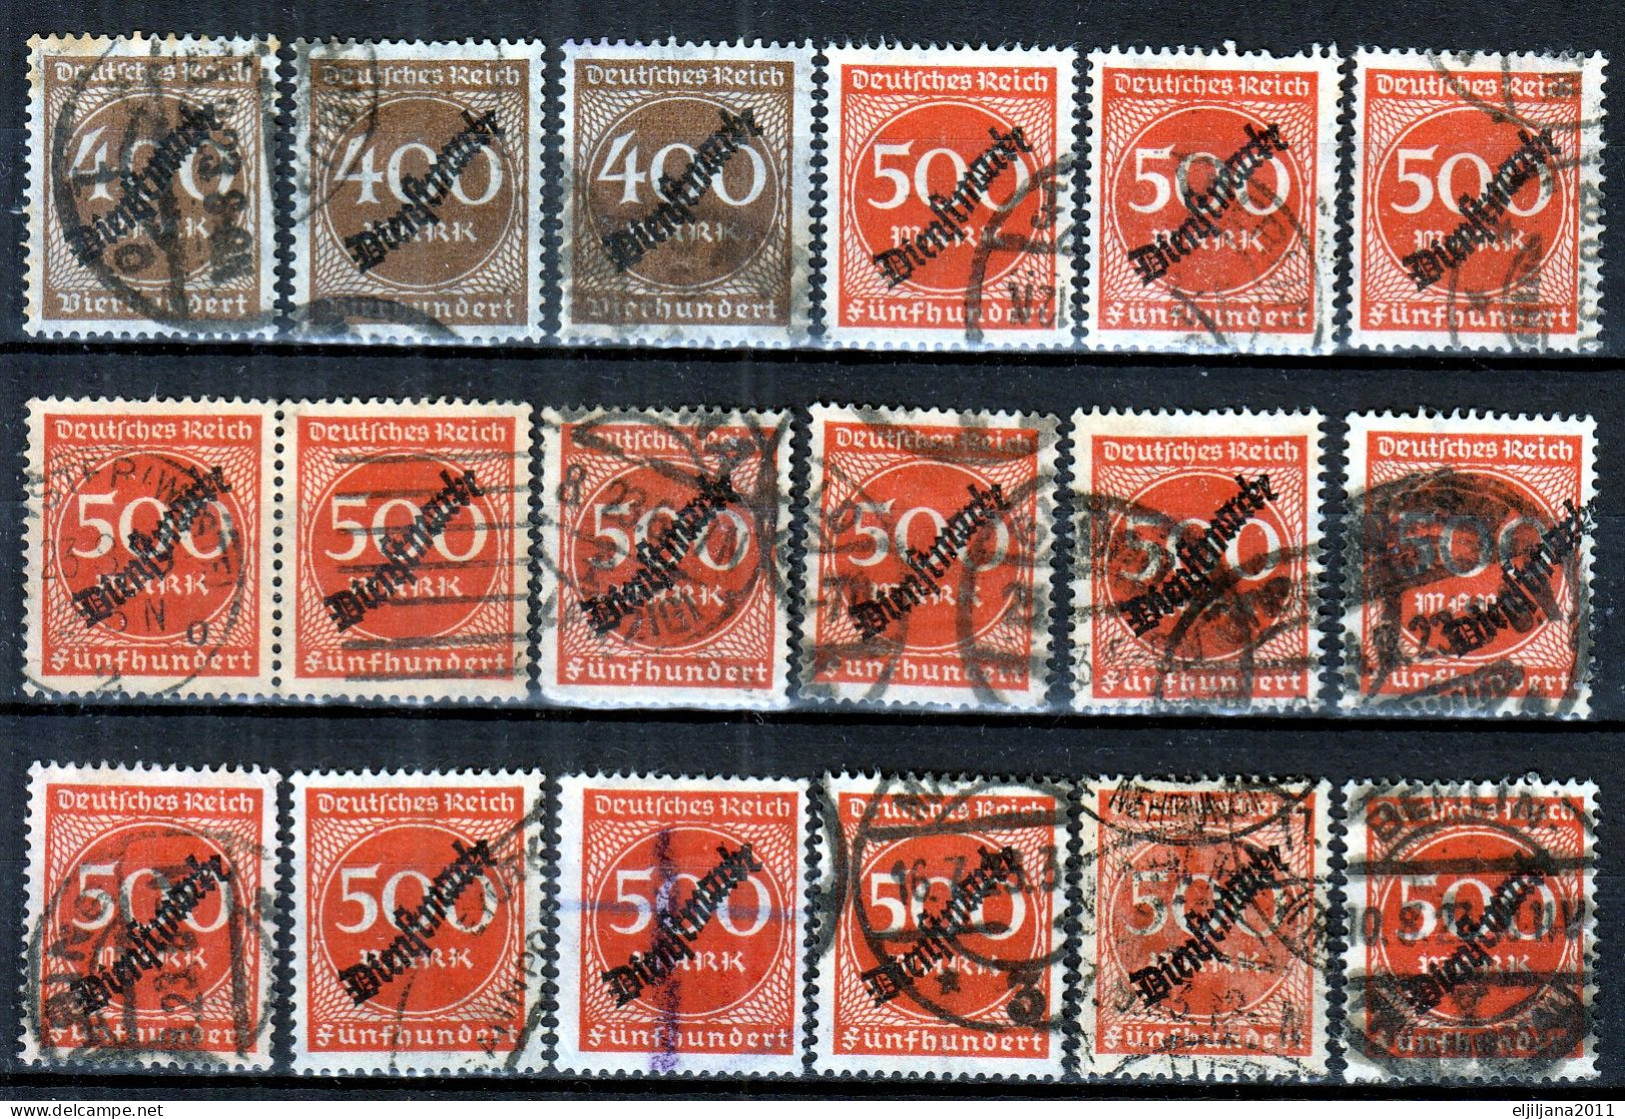 ⁕ Germany, Deutsches Reich 1923 Infla ⁕ Dienstmarke /official Stamps, Overprint ⁕ 54v ( Used & Unused, No Gum) - Oficial